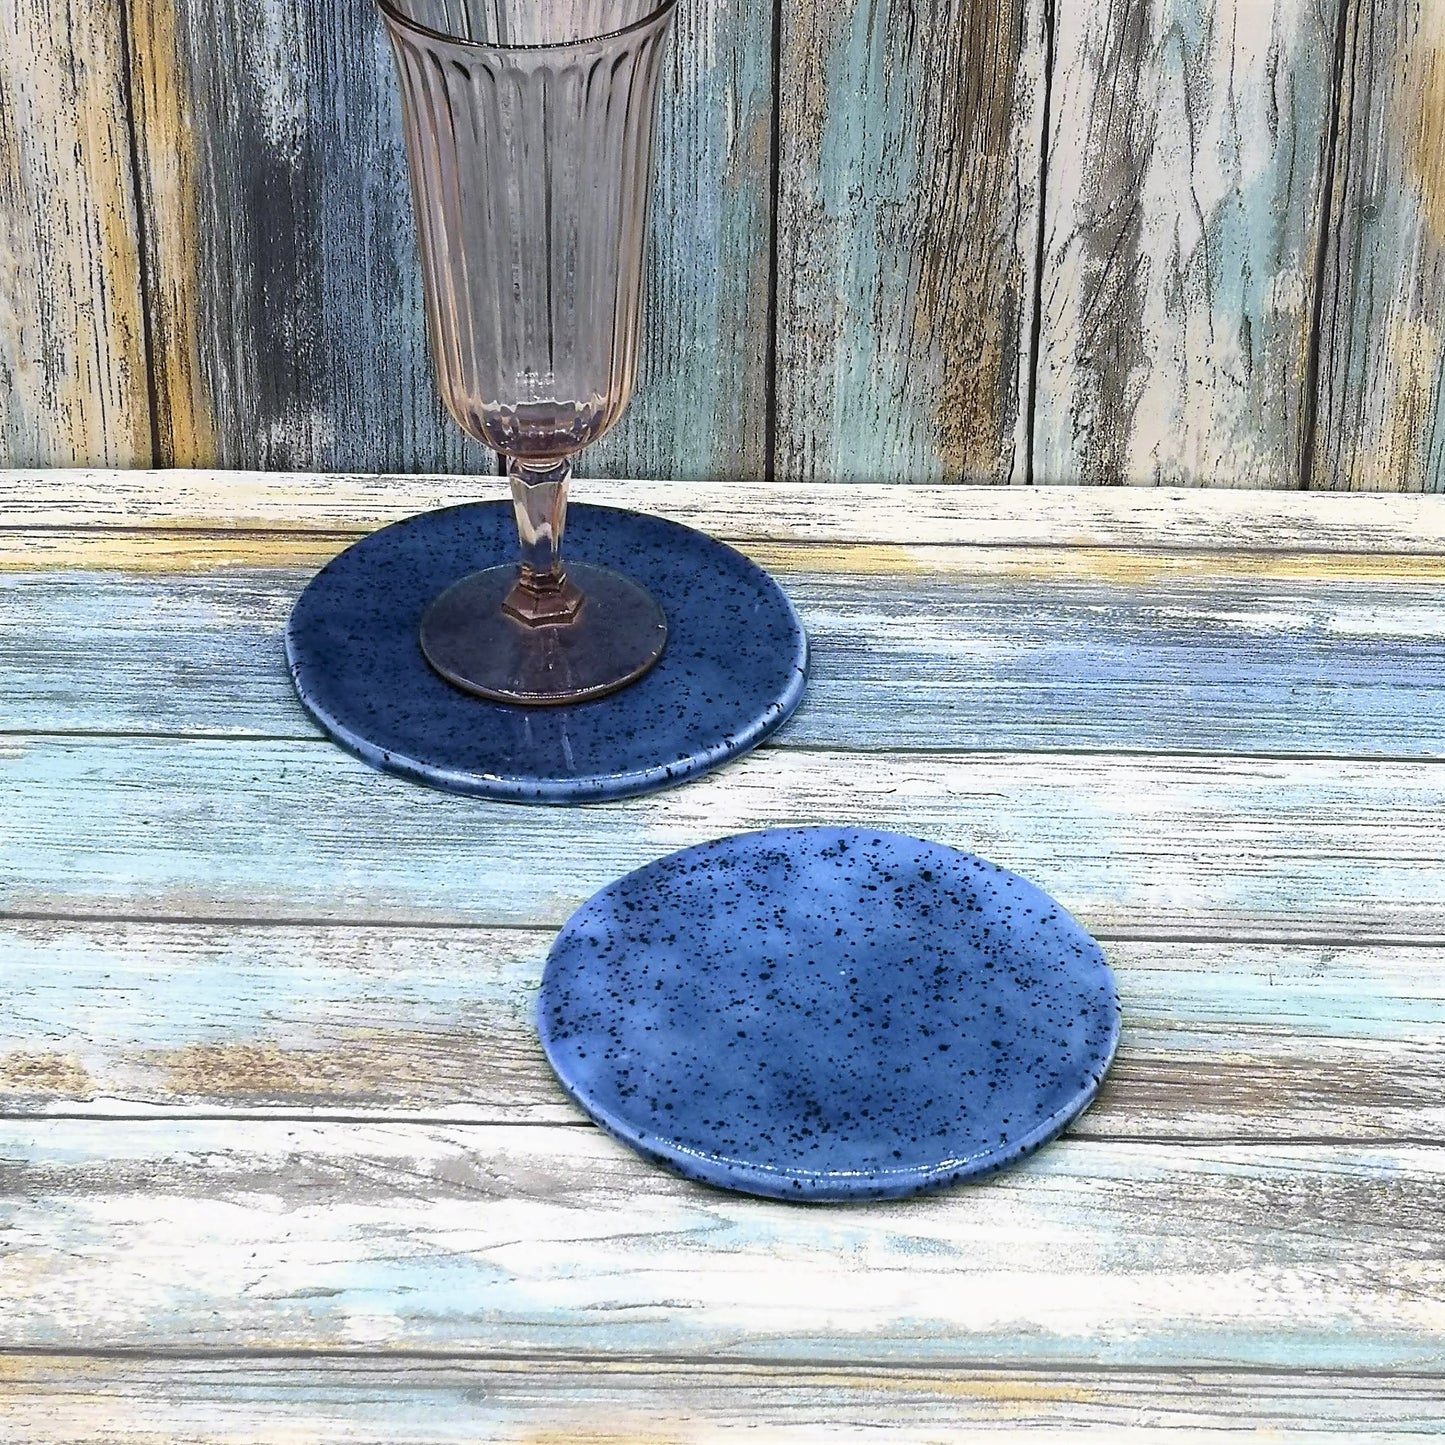 BLUE COASTERS, CERAMIC Coasters For Drinks, Office Desk Accessories For Men, Dad Birthday Gift From Daughter, Housewarming Gift First Home - Ceramica Ana Rafael